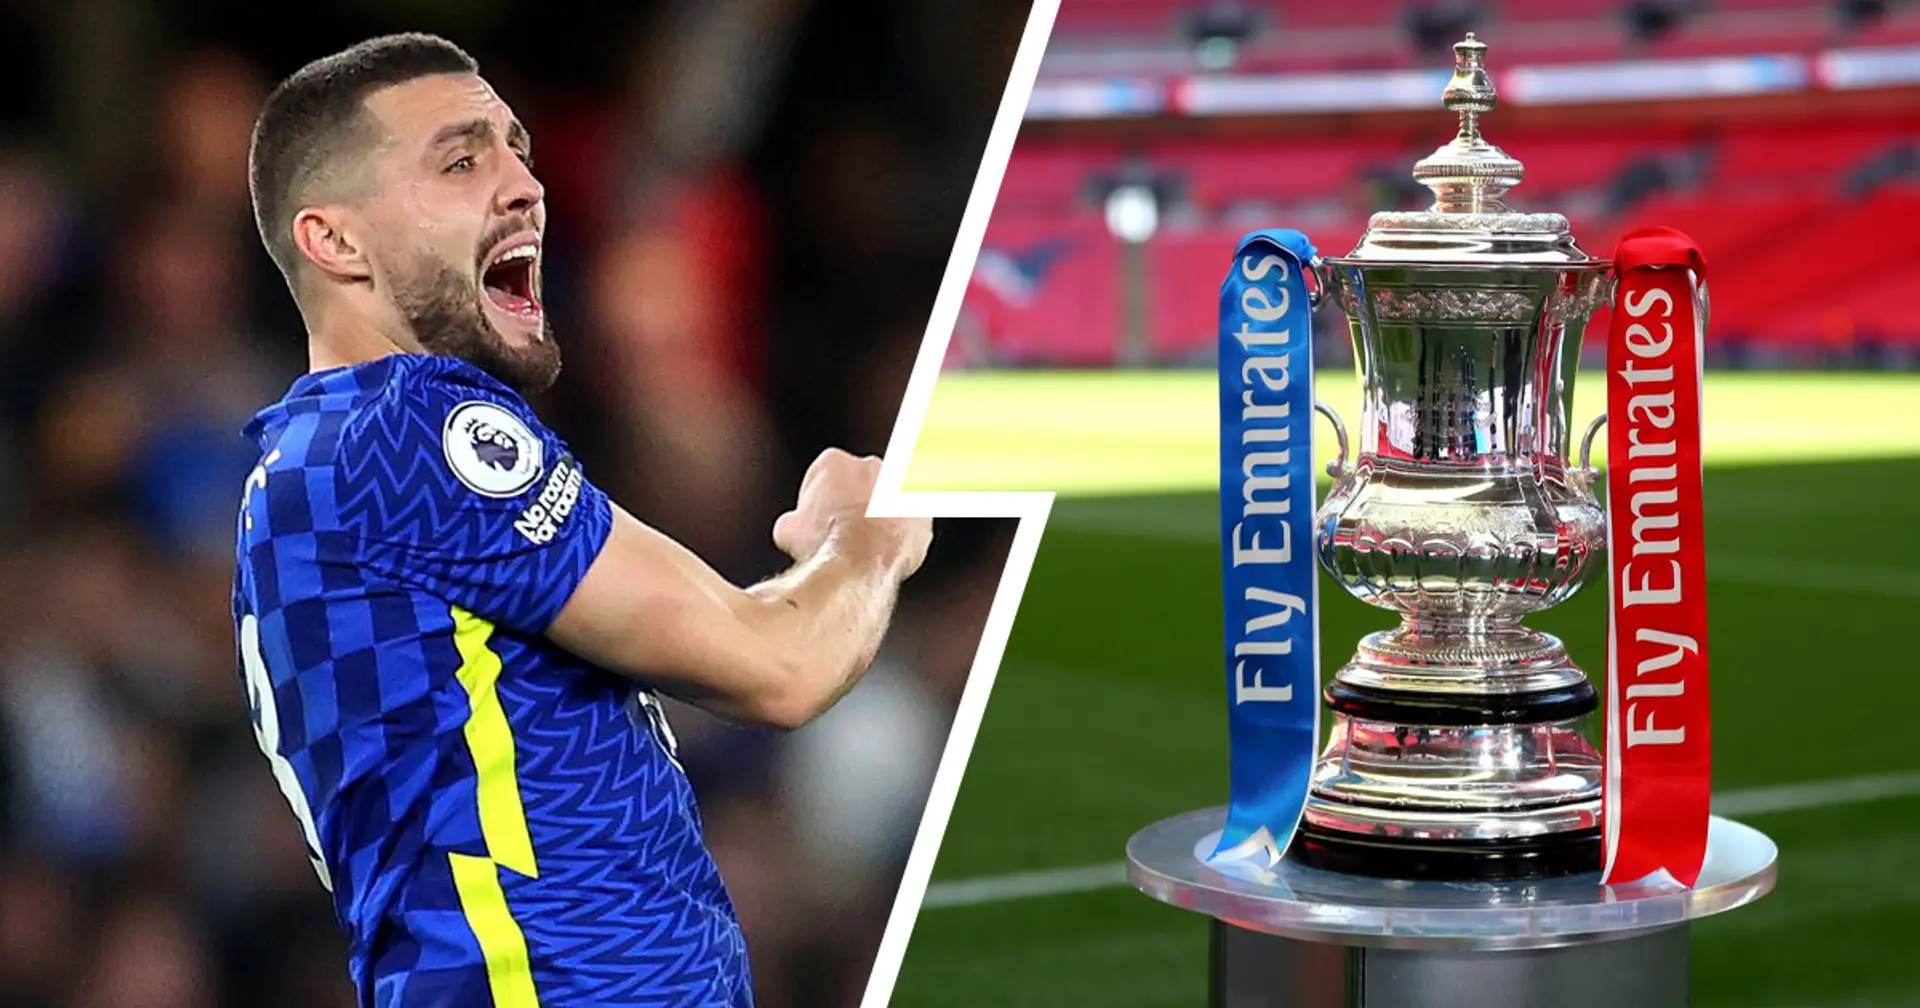 FA Cup campaign starts on Saturday: a reminder of Chelsea's next 5 fixtures